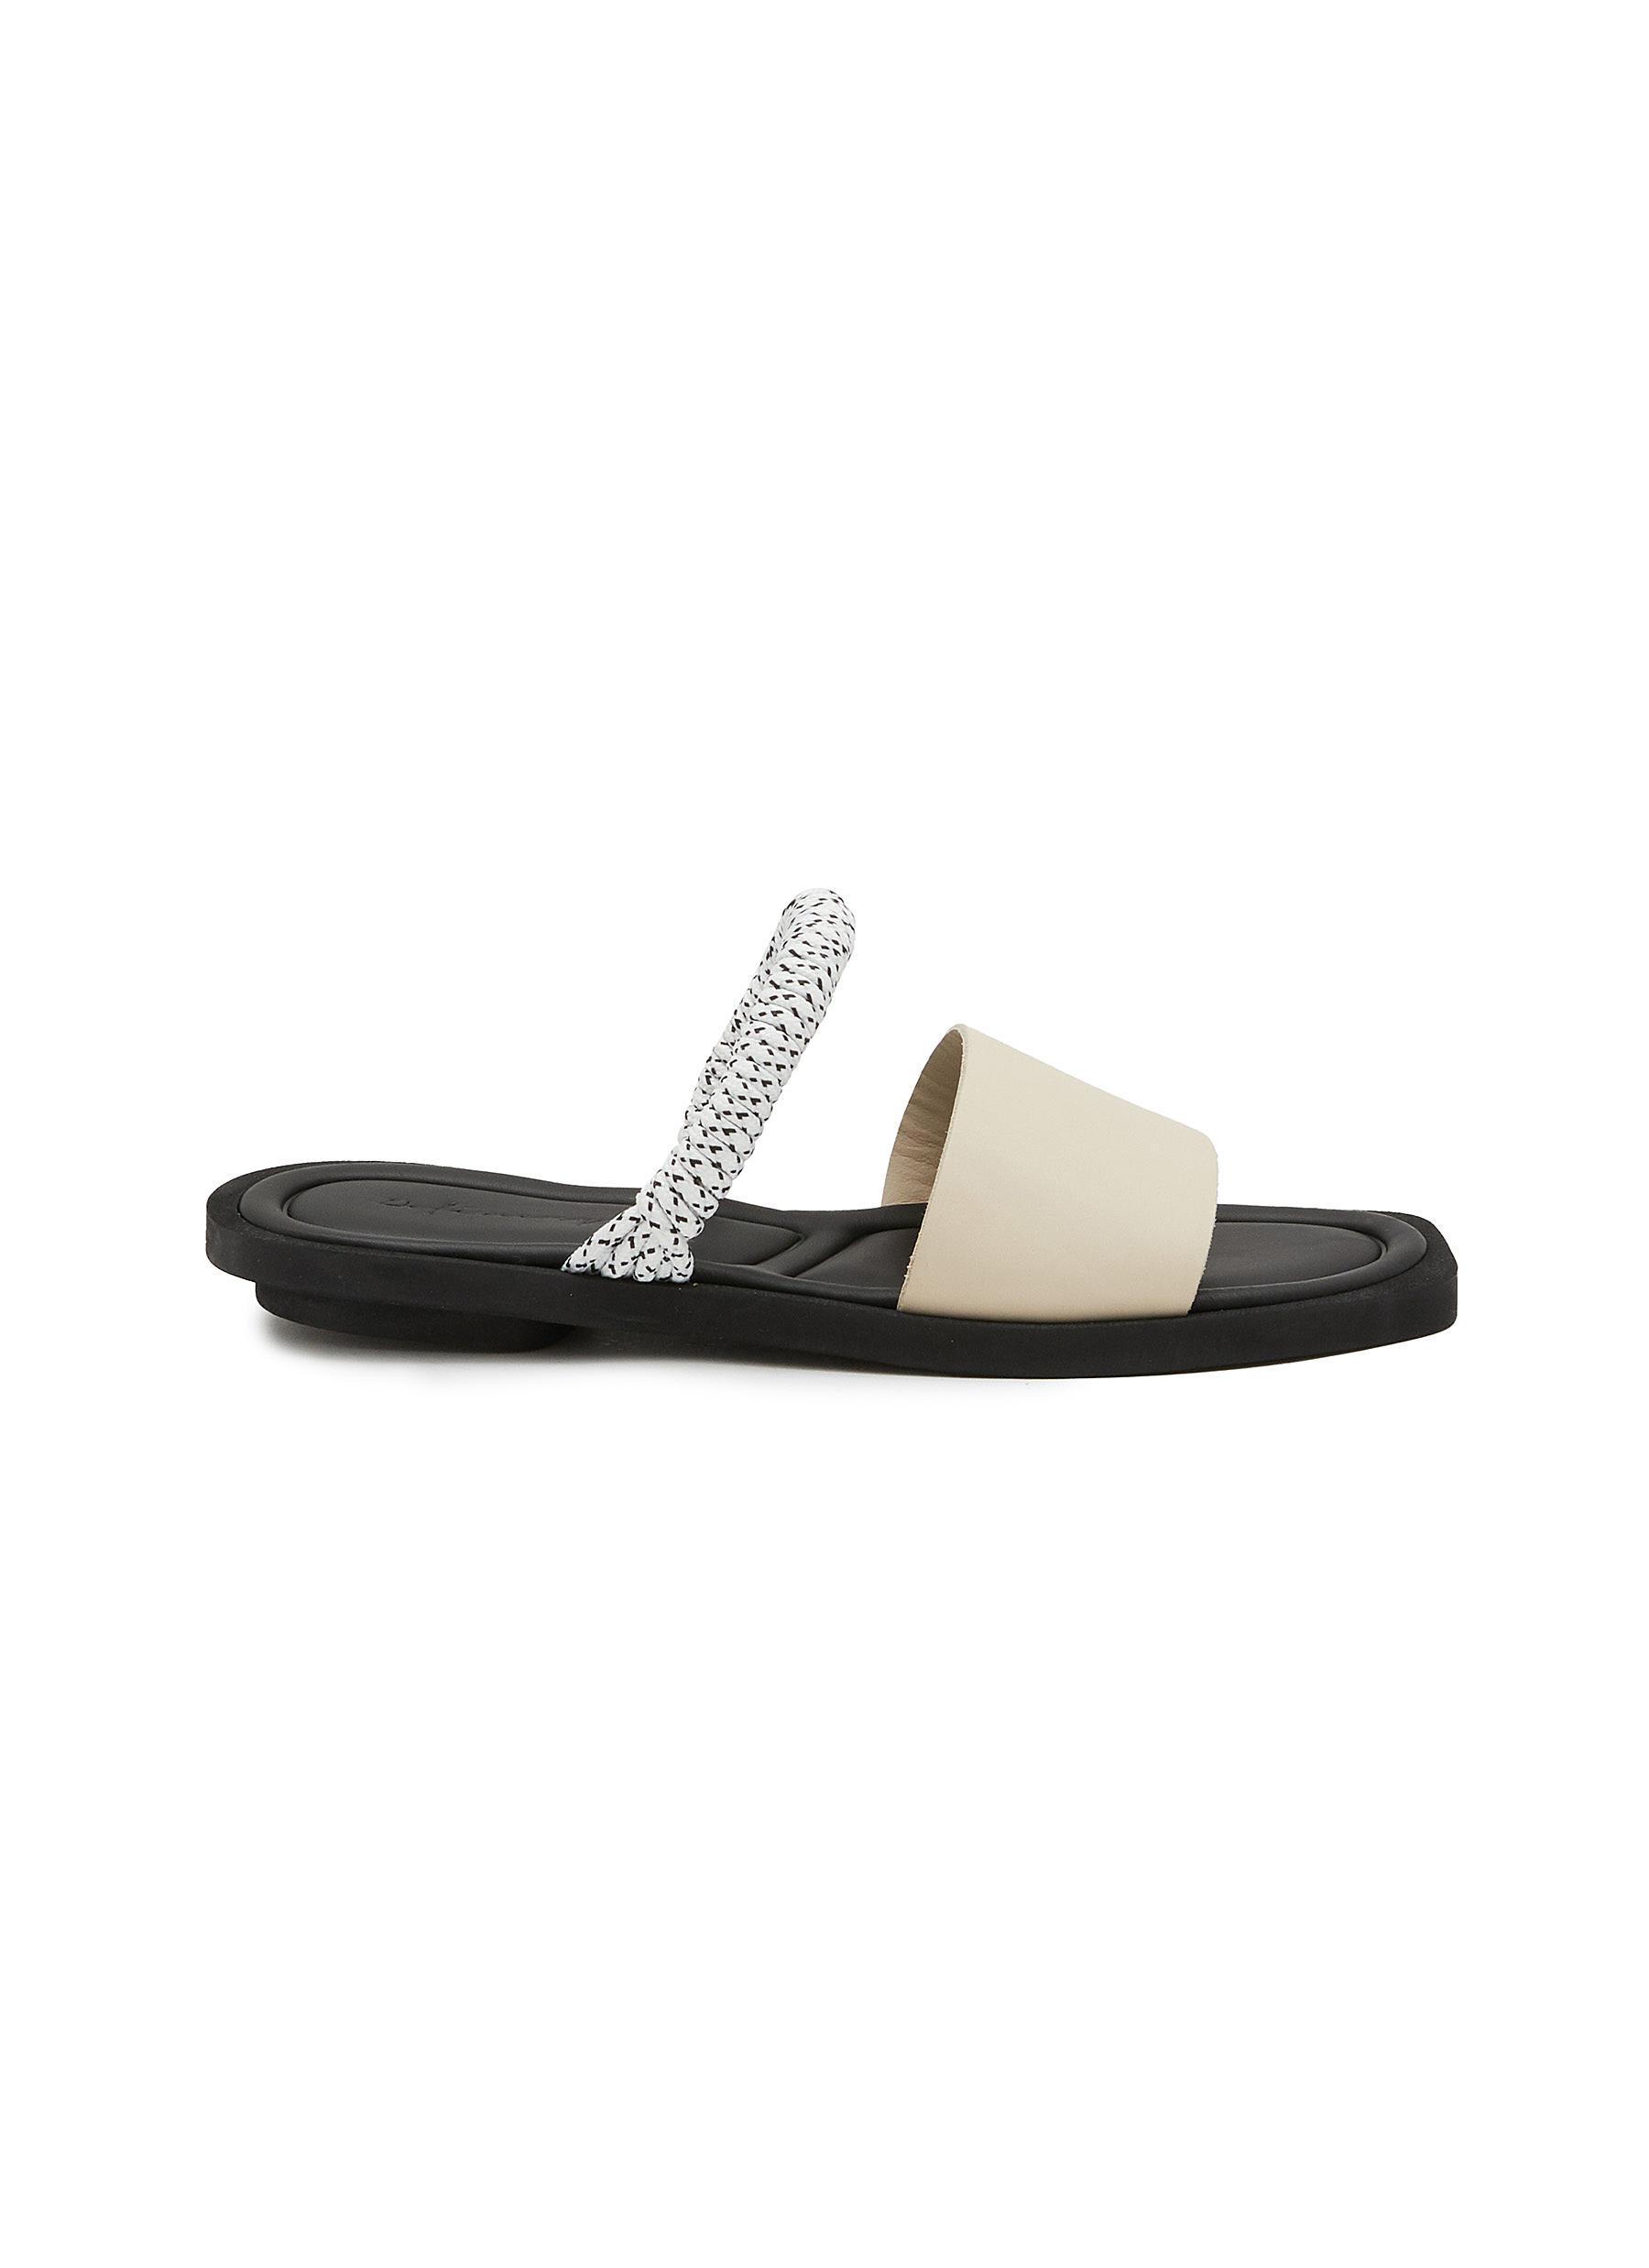 DEFINERY ‘Twist Open' Double Band Square Toe Sandals